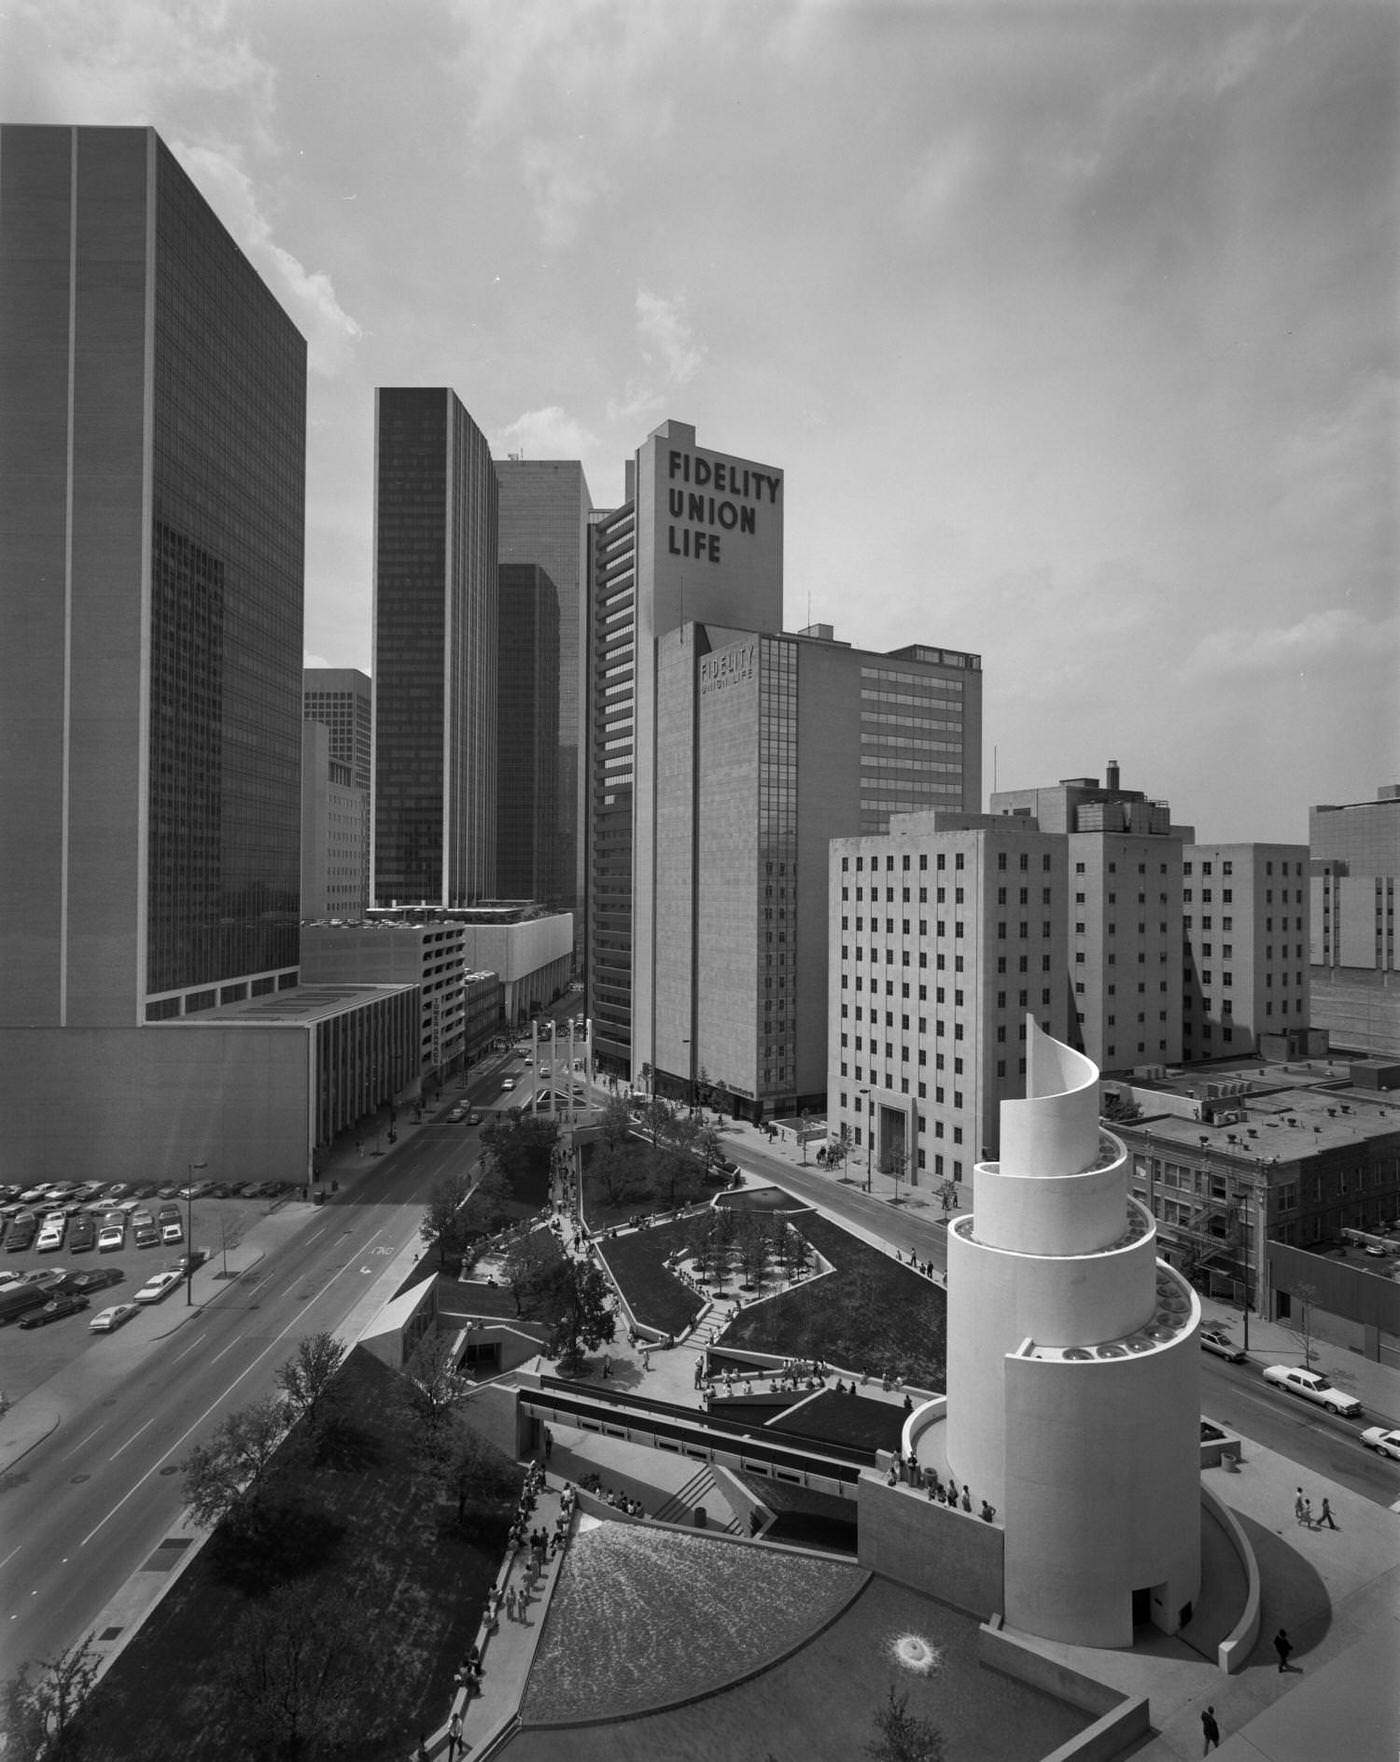 verview of Downtown Dallas, 1960s. The picture includes Thanksgiving Square and the Fidelity Union Life building.